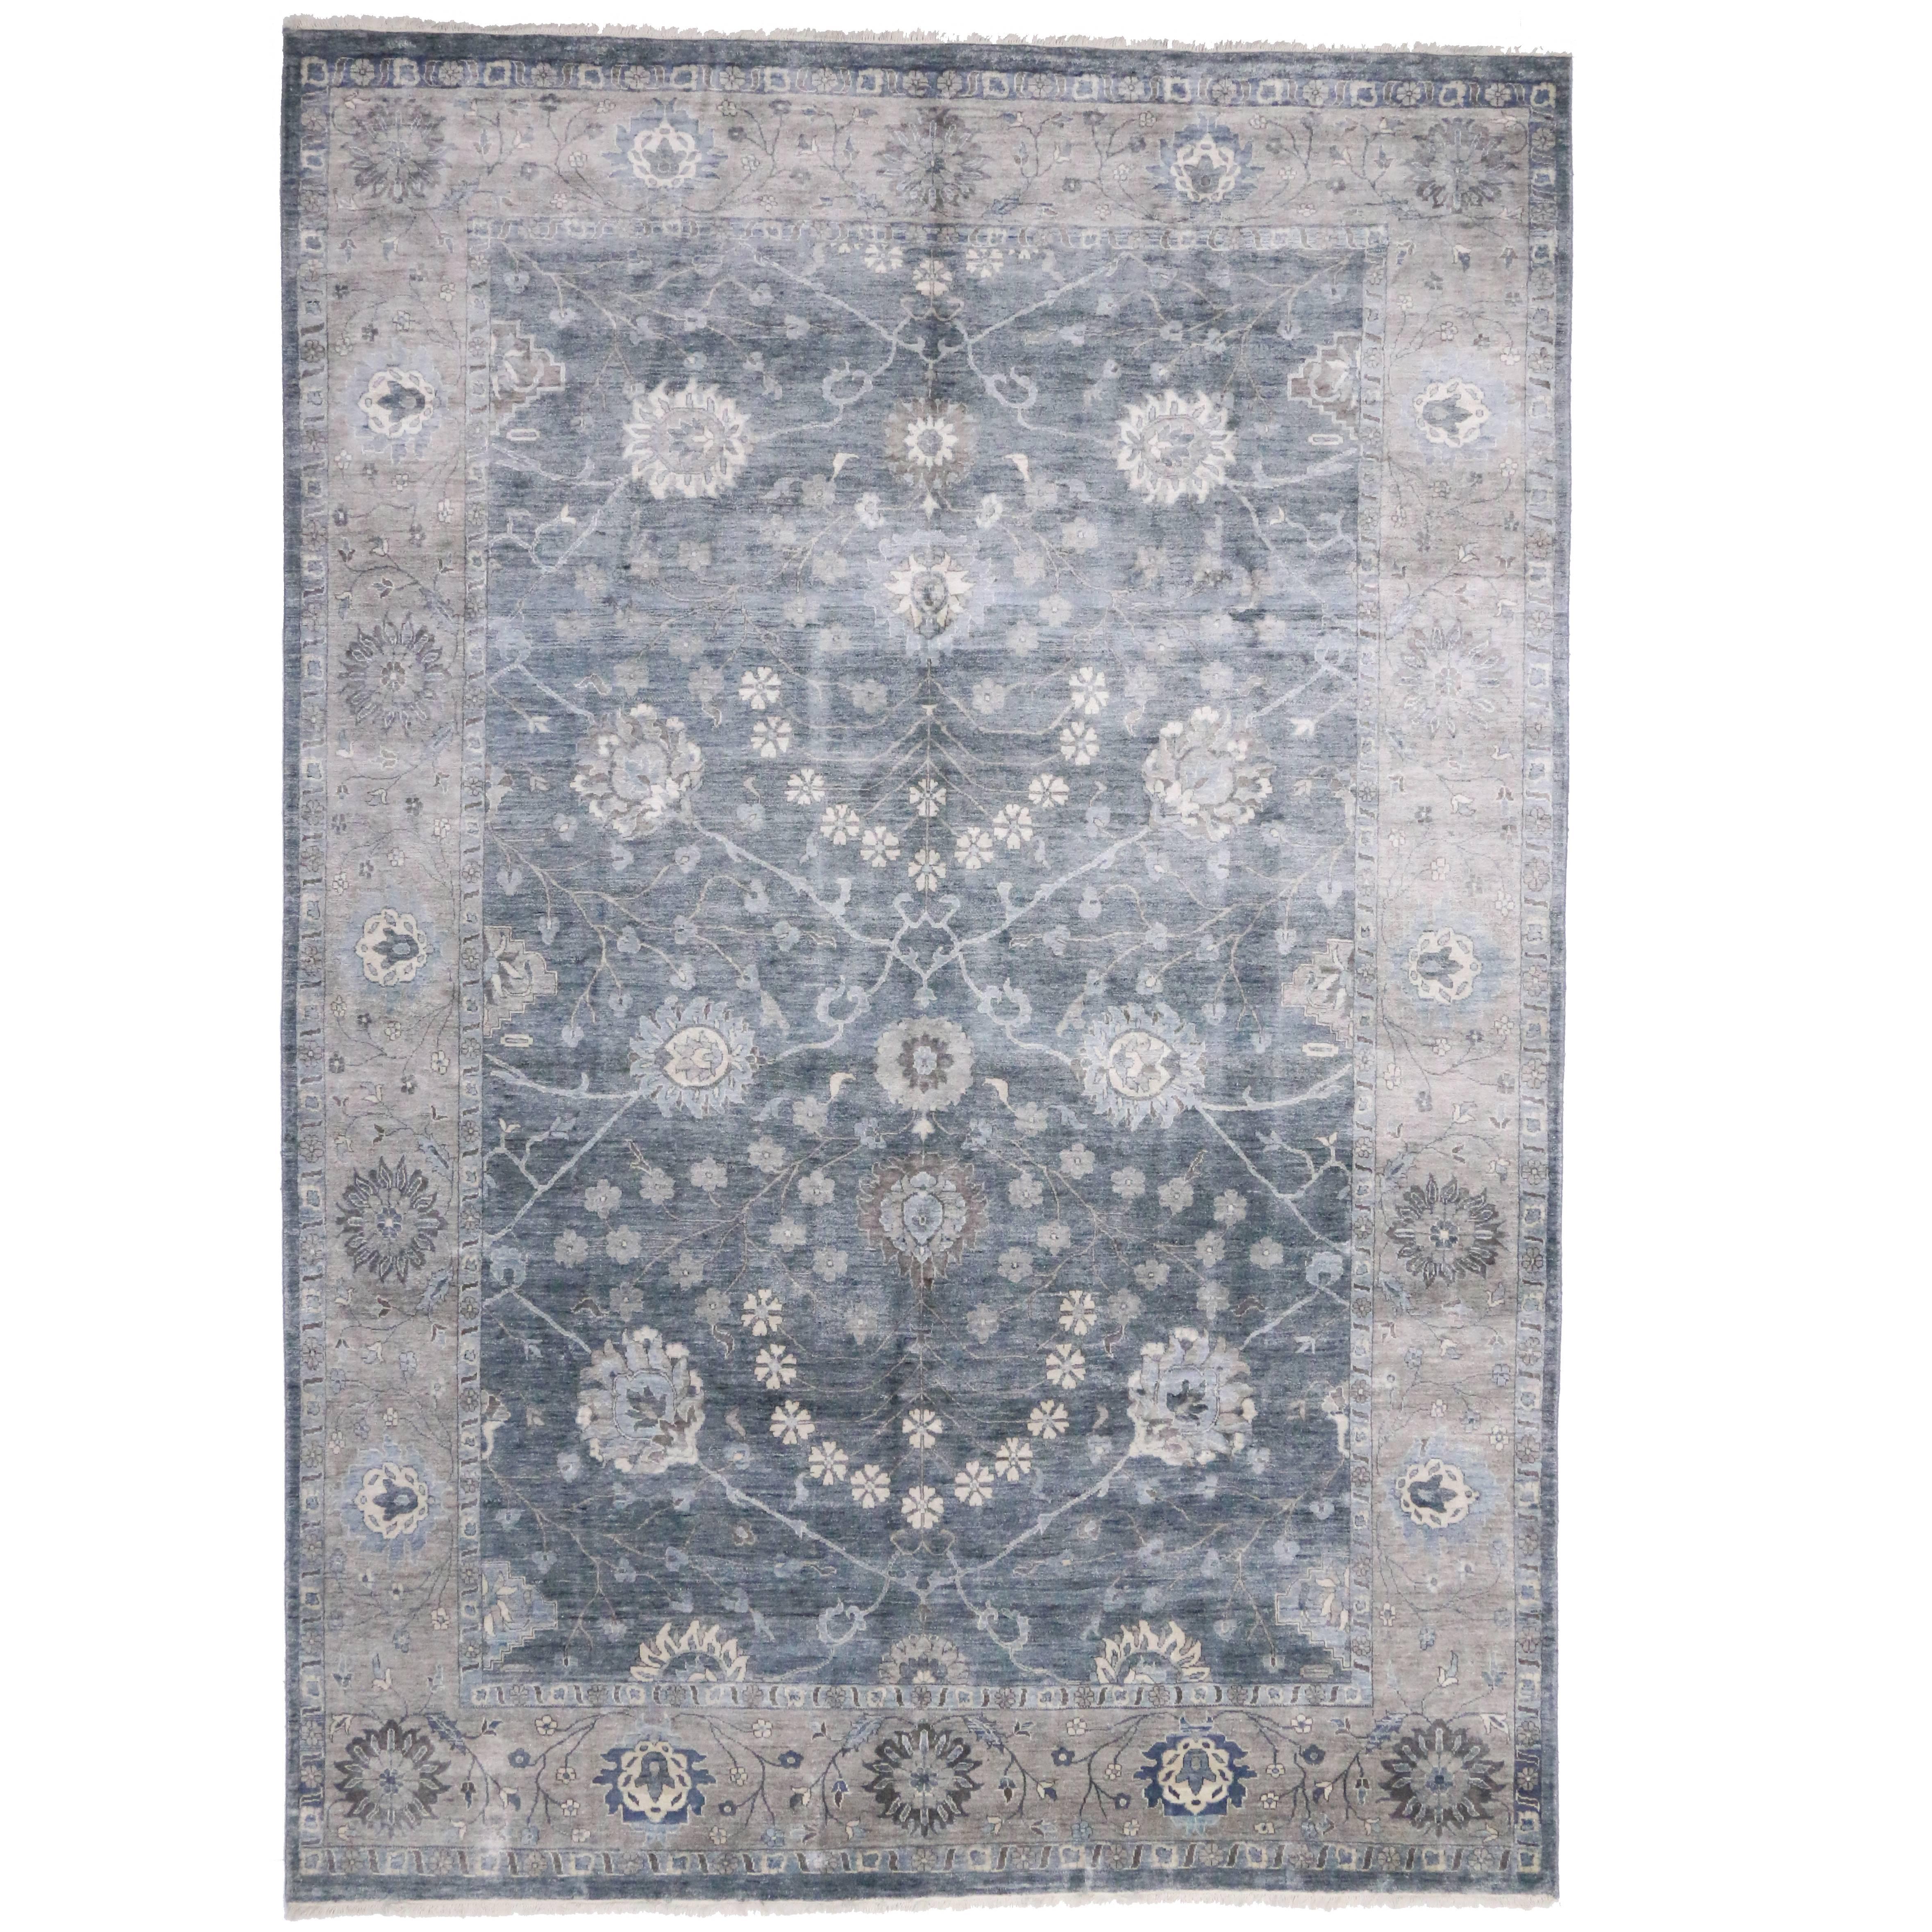 New Contemporary Indian Oushak Wool & Silk Rug with Modern Style